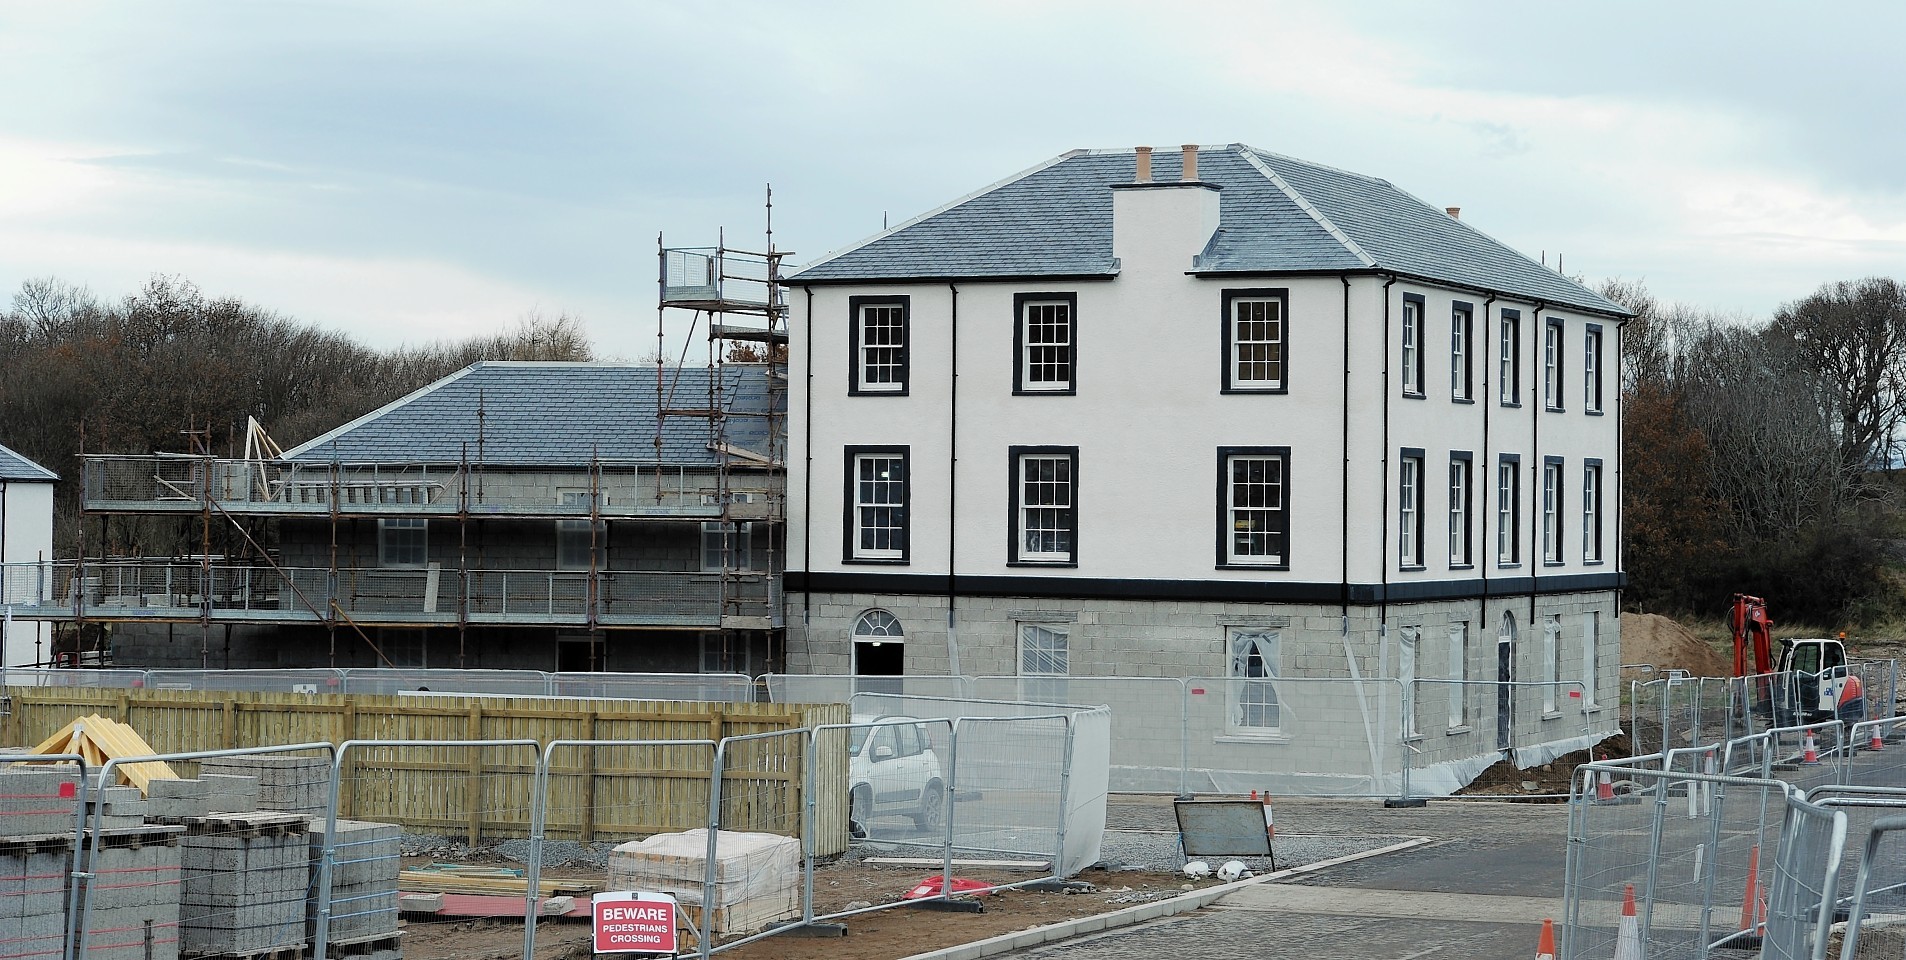 The housing development at Tornagrain continues with some of the houses nearing completion.